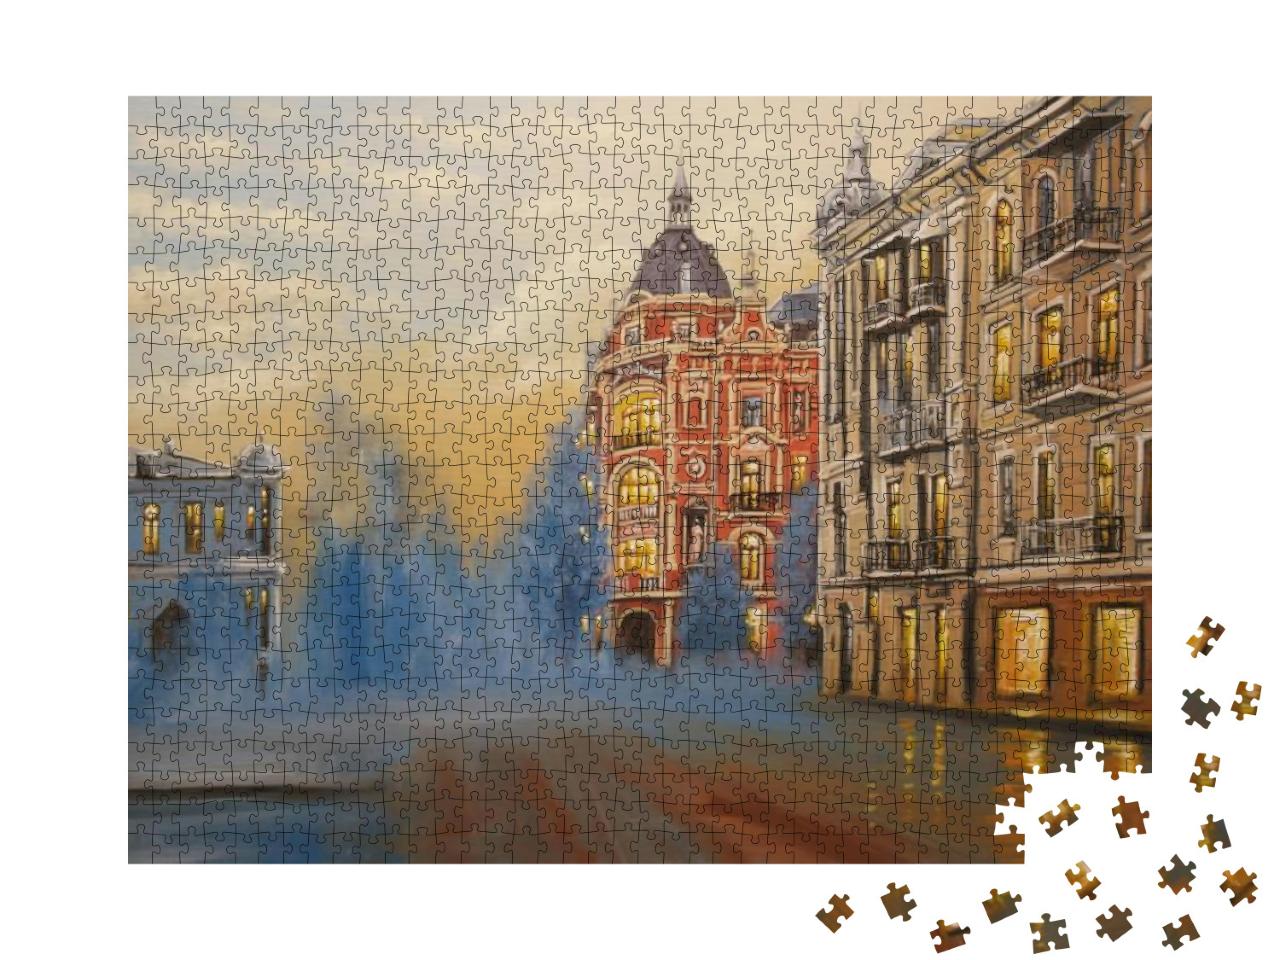 Oil Paintings Landscape, Old Houses in City. Fine Art... Jigsaw Puzzle with 1000 pieces